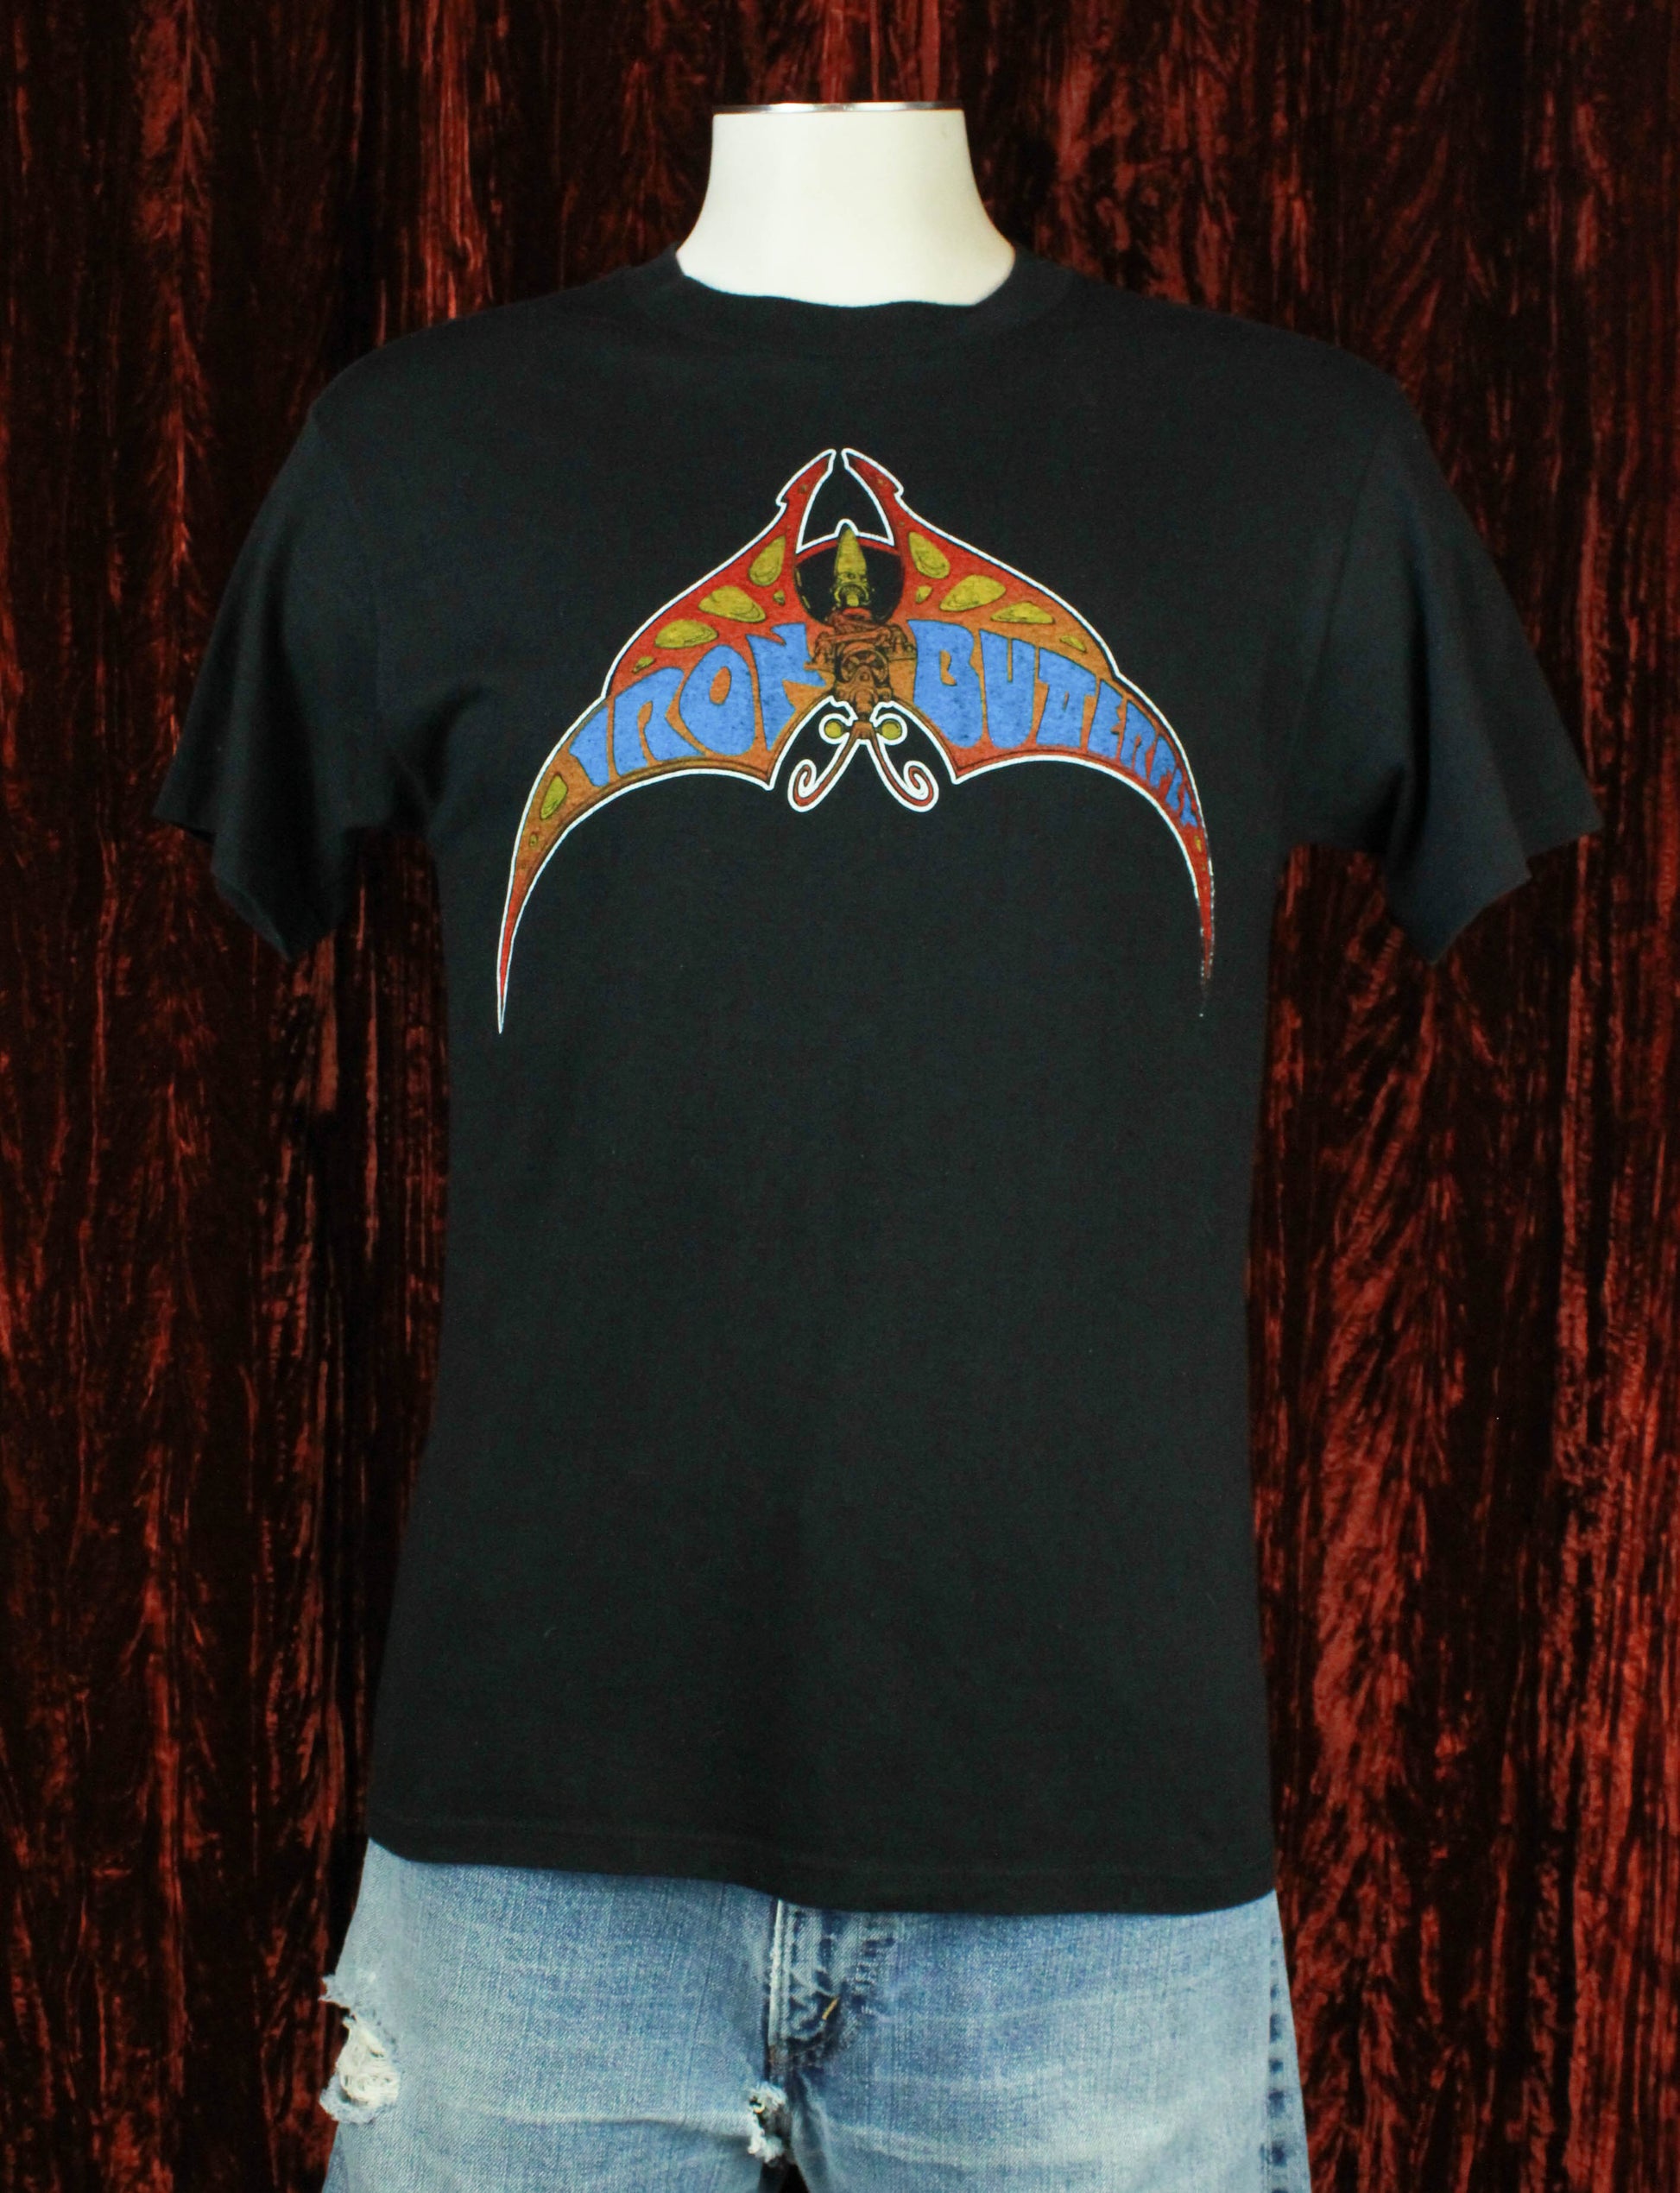 Vintage Iron Butterfly Concert T Shirt 1987 Wings Of Flight Tour - Large